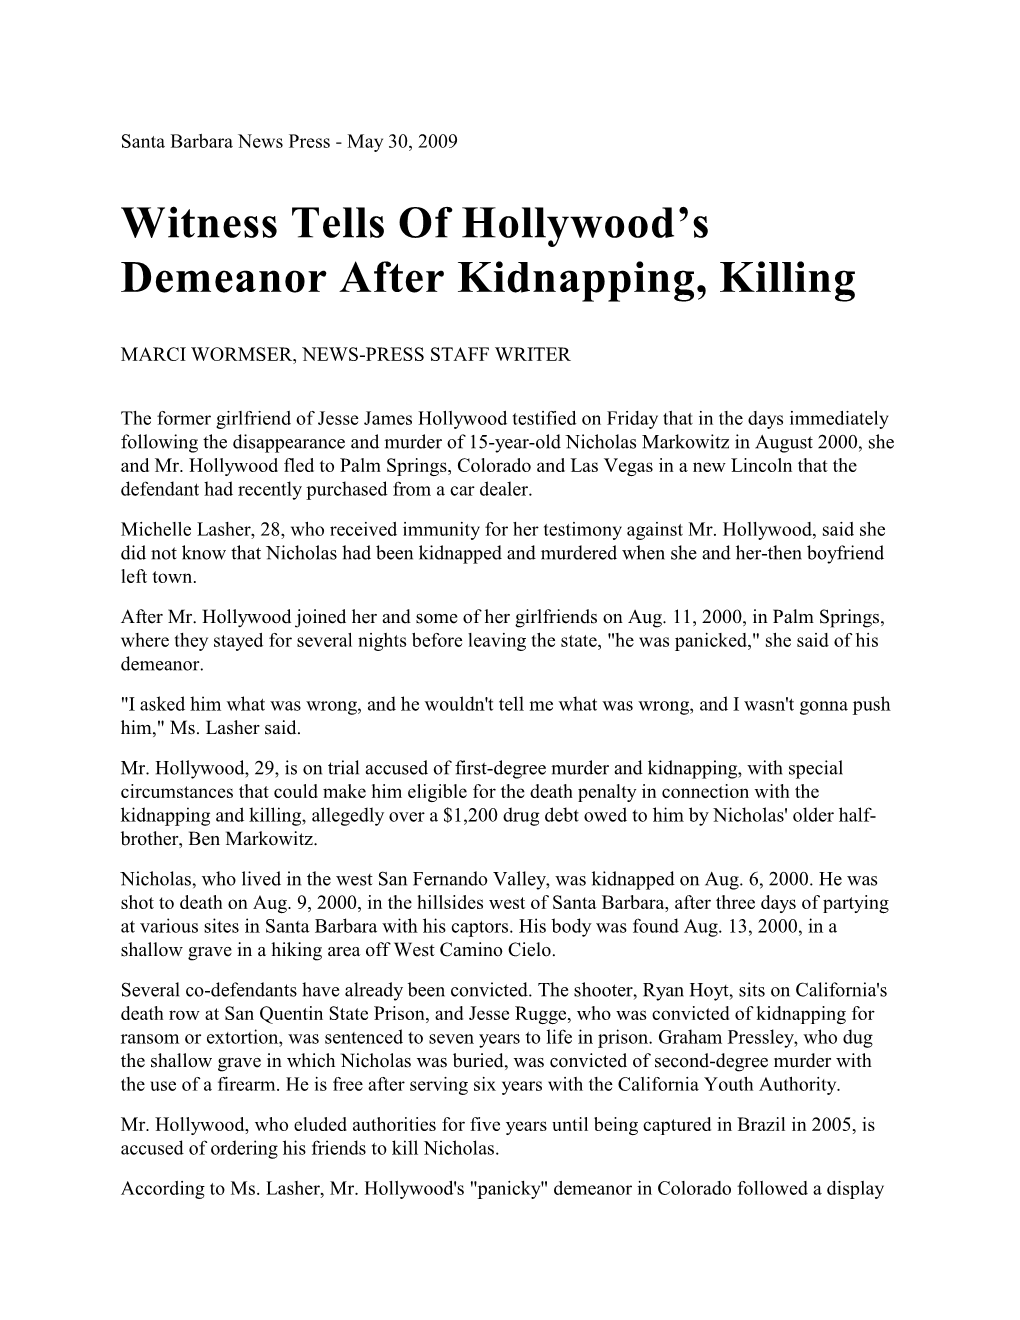 Witness Tells of Hollywood's Demeanor After Kidnapping, Killing